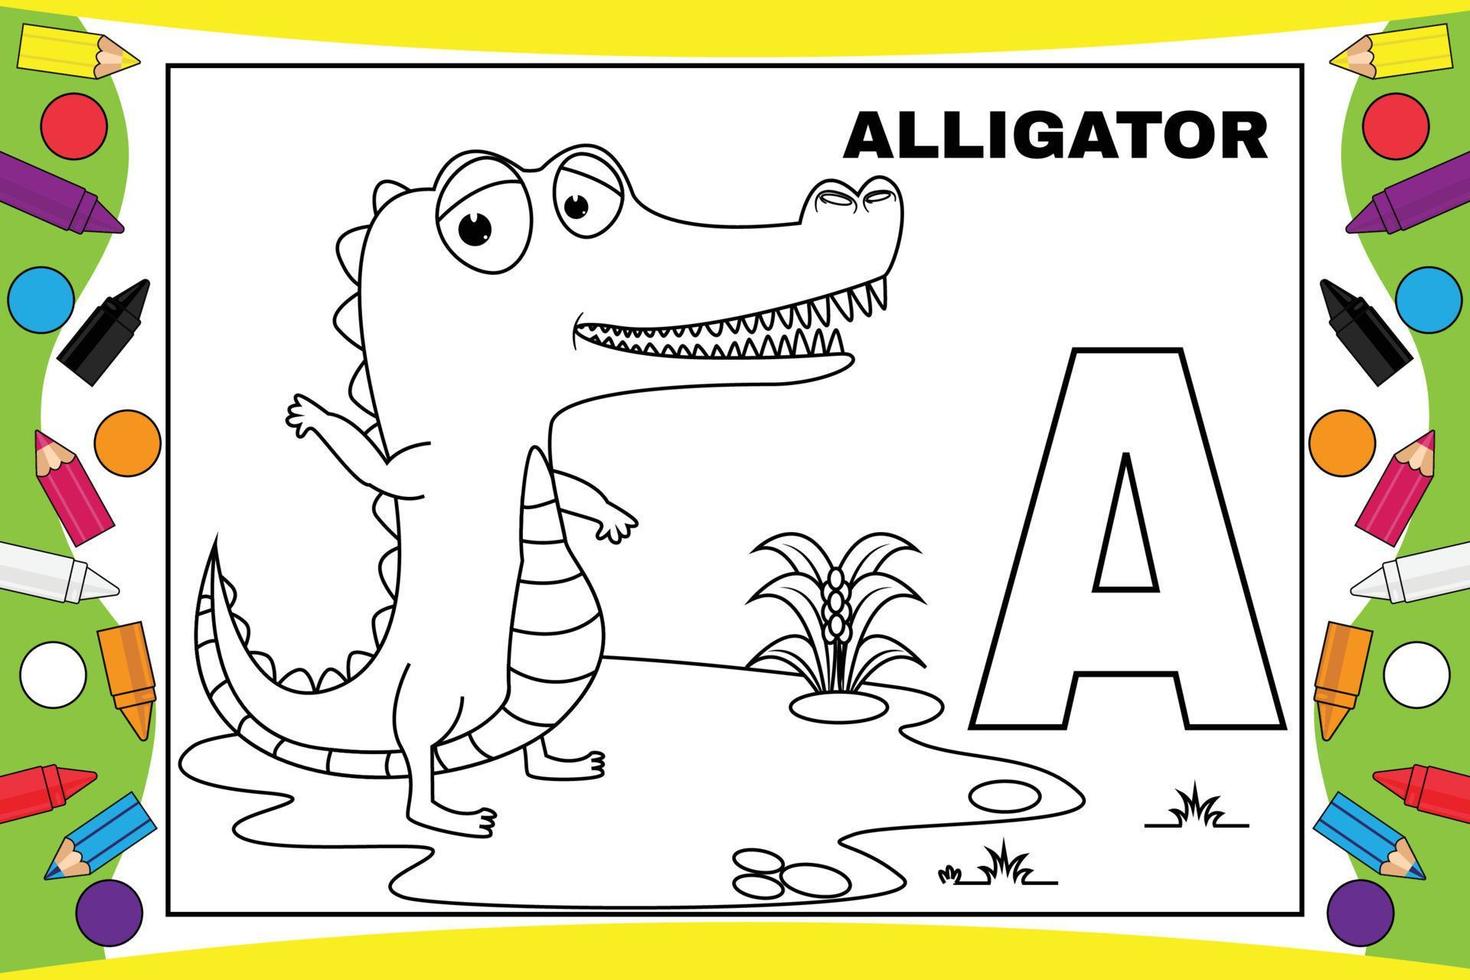 coloring alligator cartoon with alphabet for kids vector